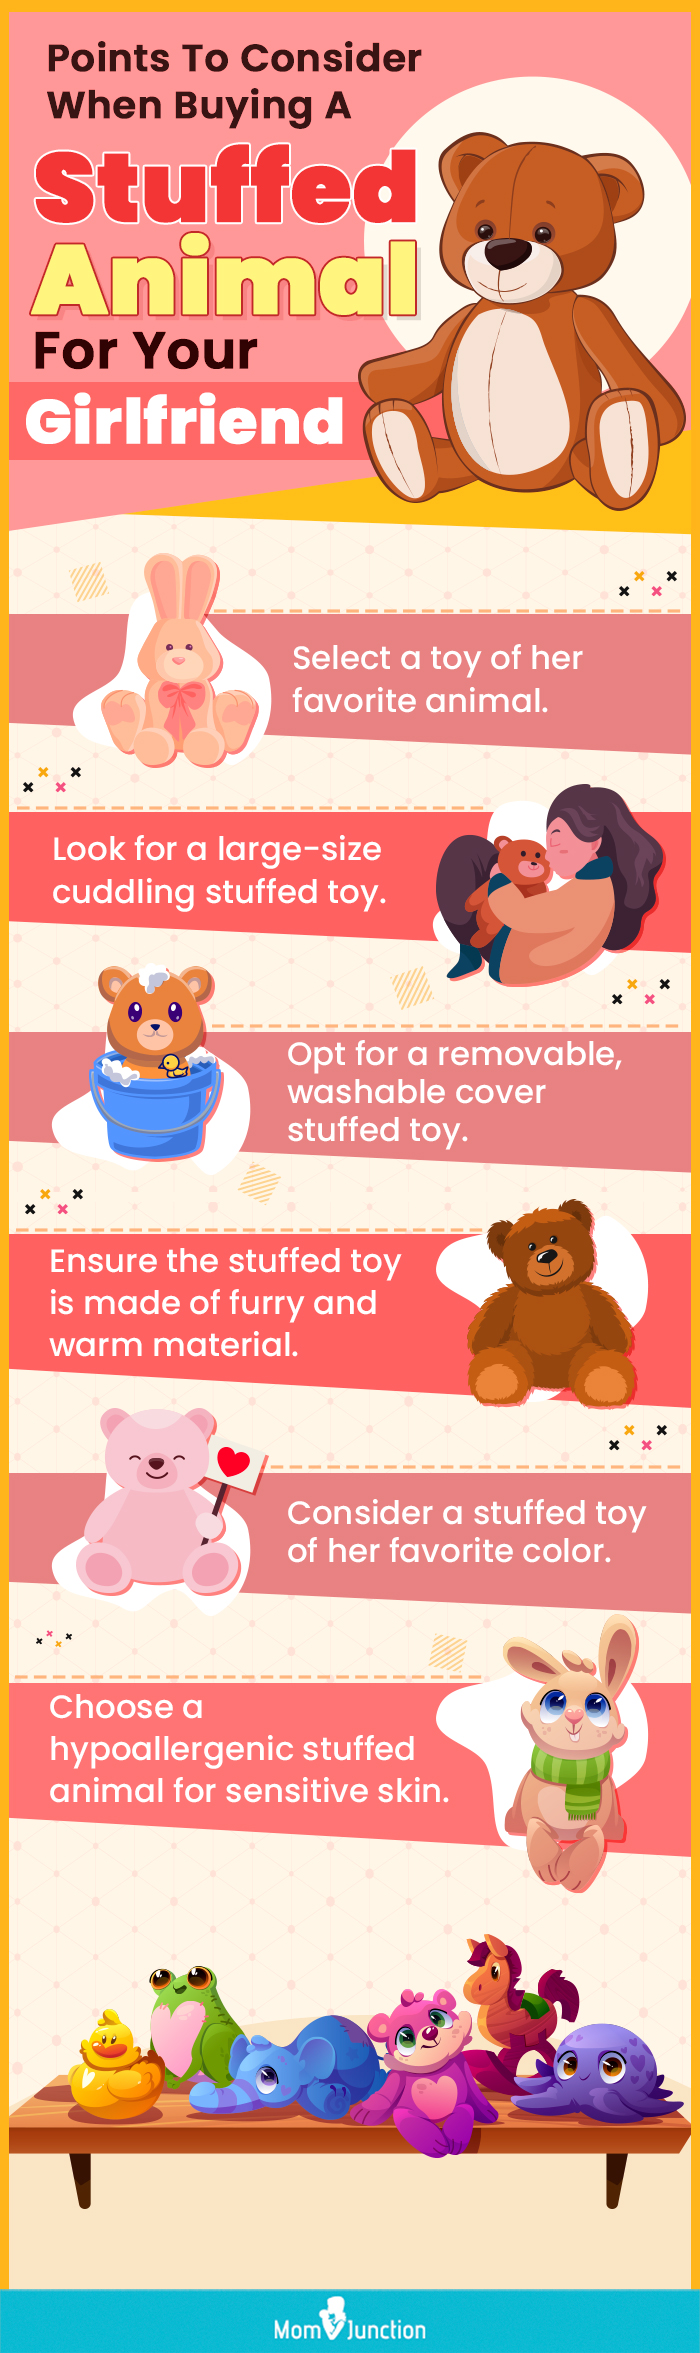 Points-To-Consider-When-Buying-A-Stuffed-Animal-For-Your-Girlfriend (infographic)